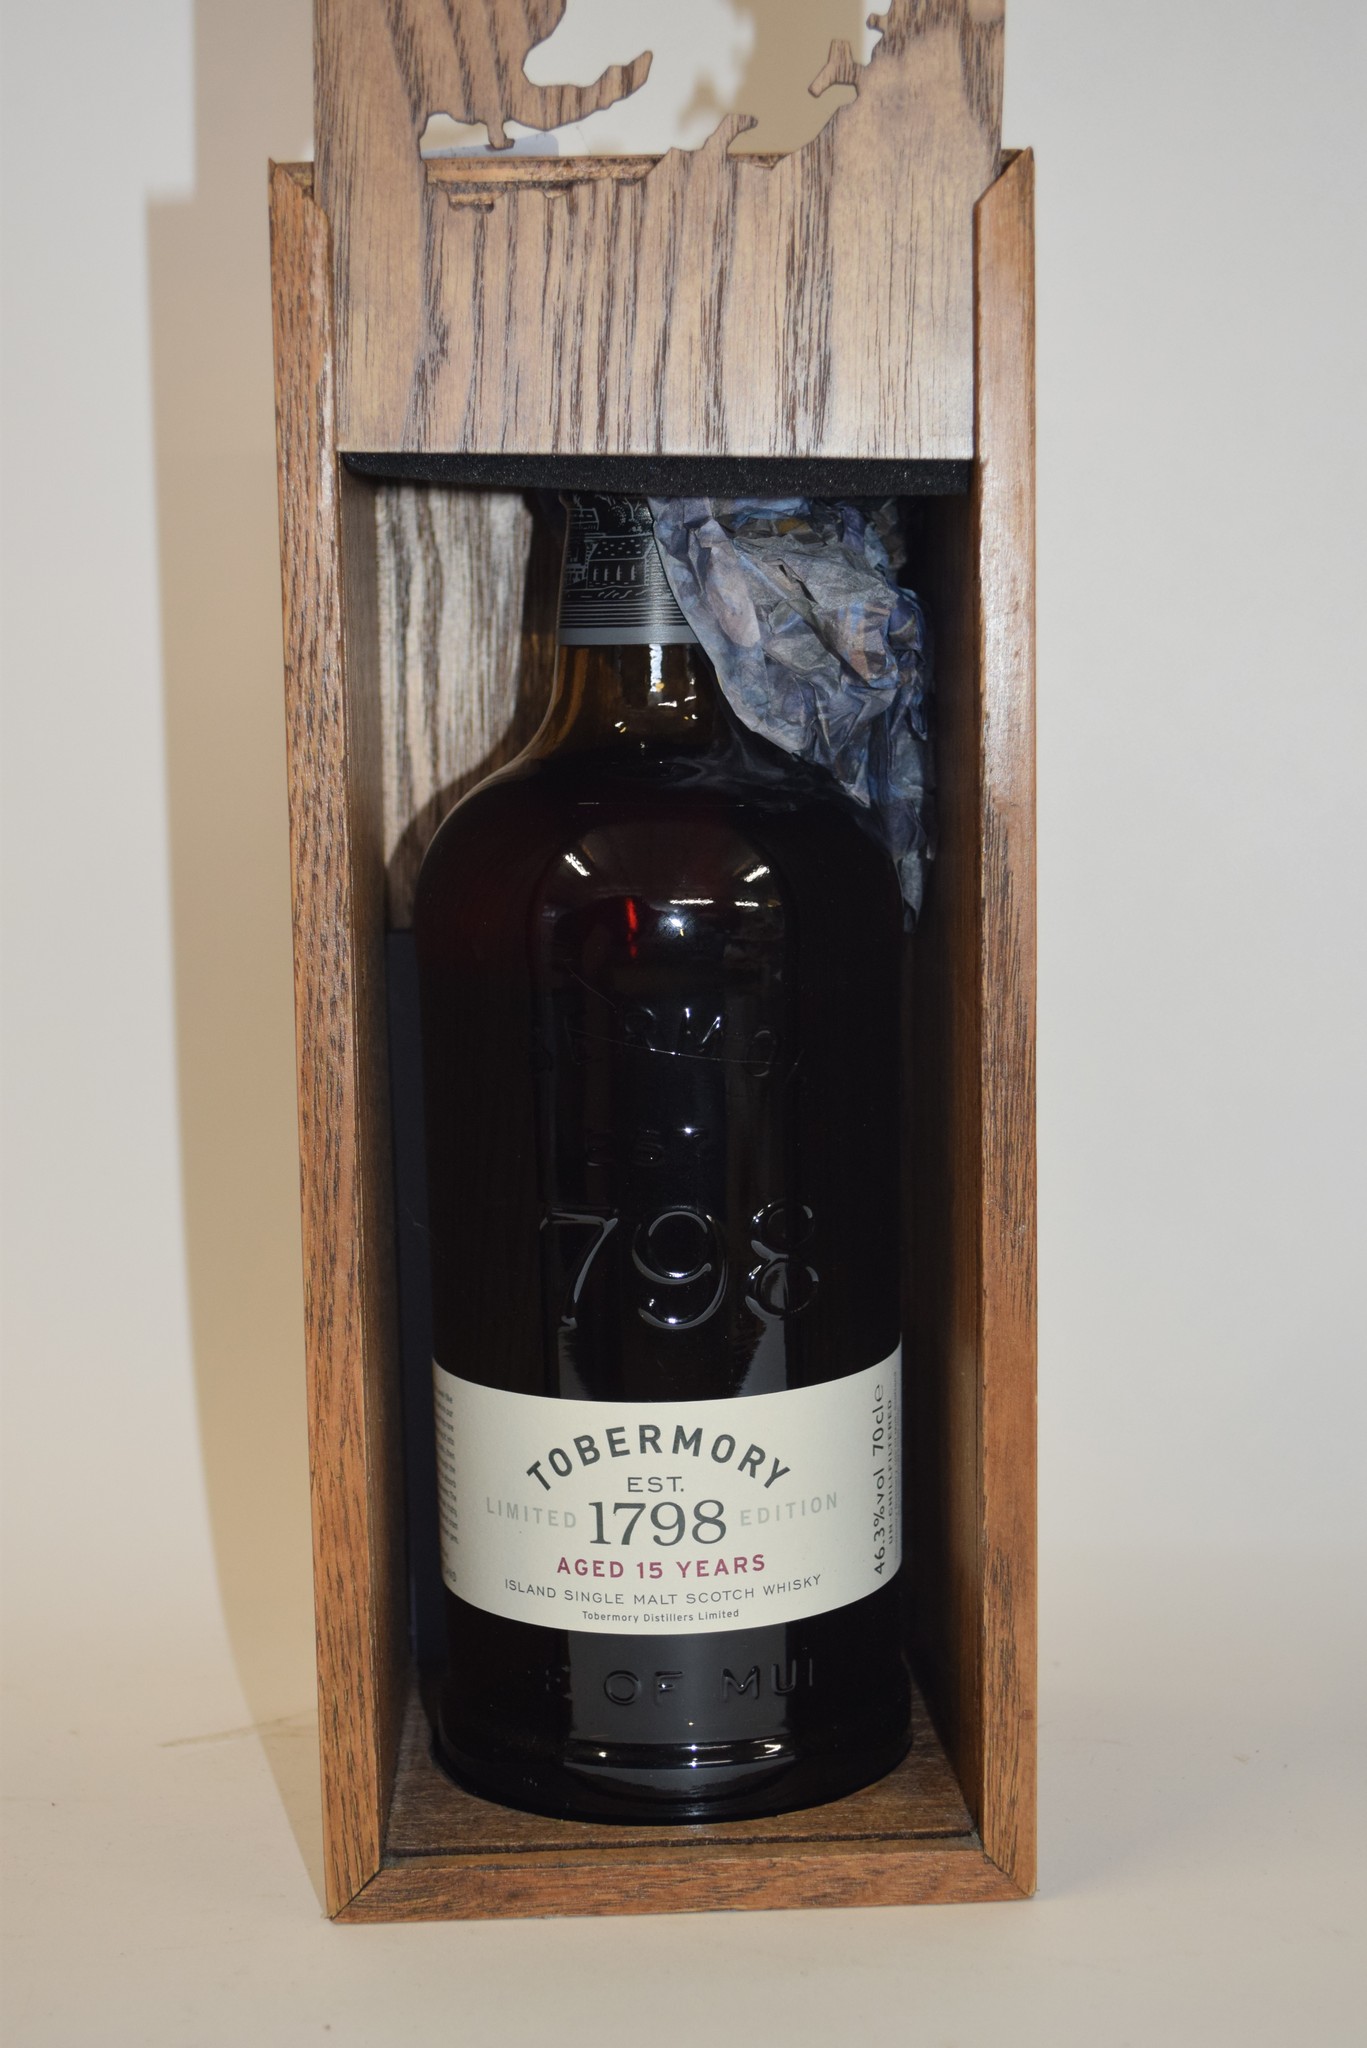 Tobermory Island Single Malt Scotch Whisky aged 15yo, (unchill filtered), 70cl, 46.3% vol in - Image 2 of 2